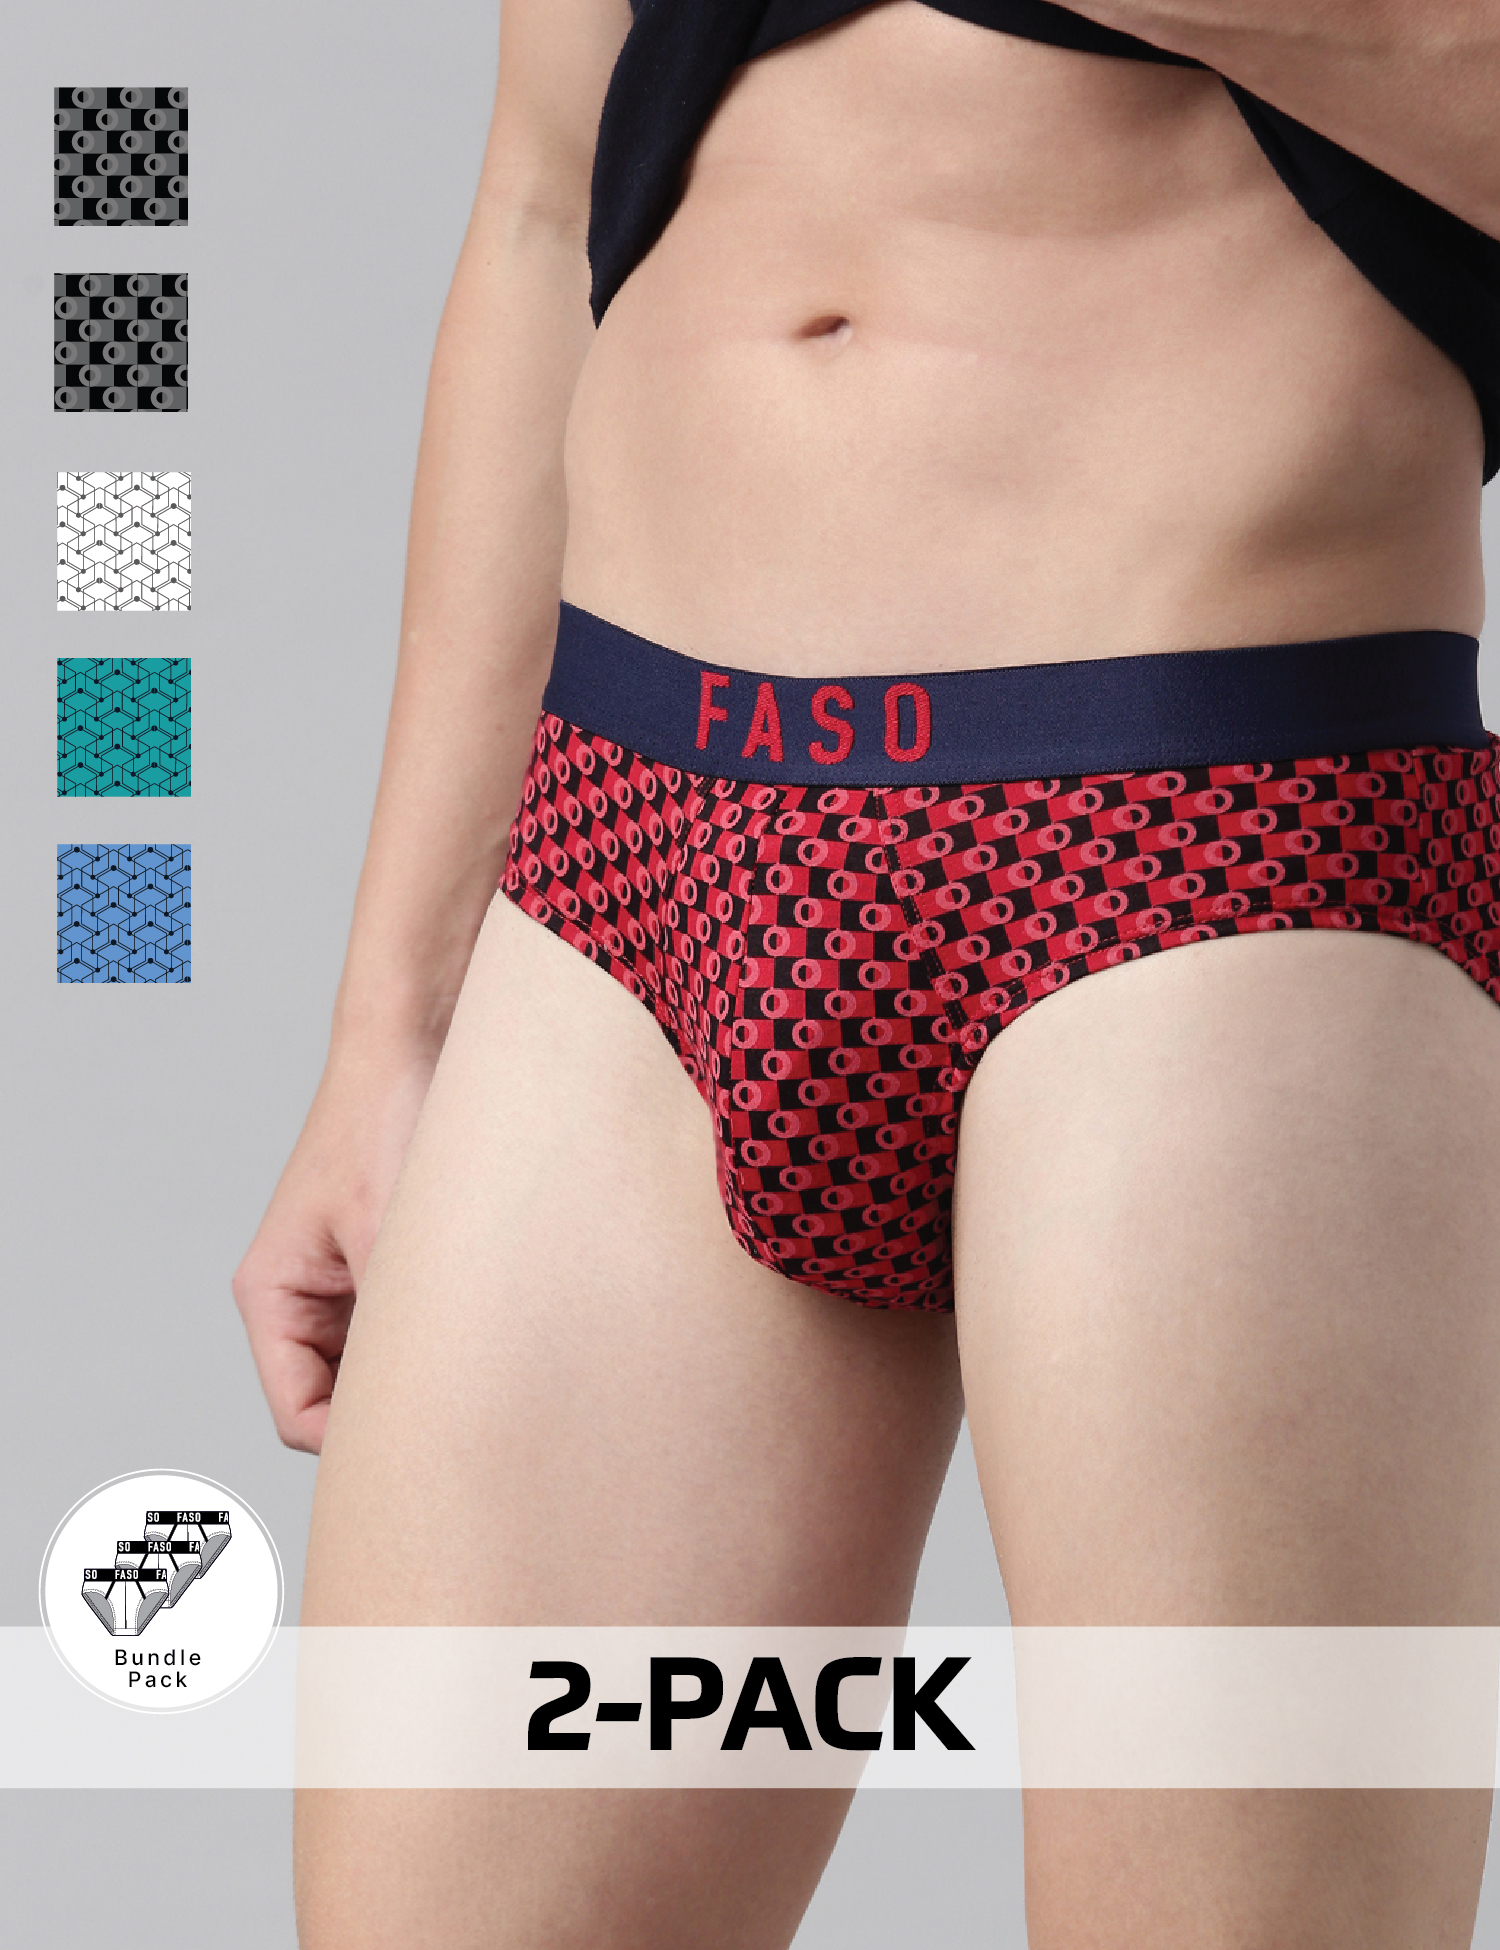 100% COTTON NEW PATTERN PRINTED BRIEF - FS2004 Assorted (PACK OF 2)